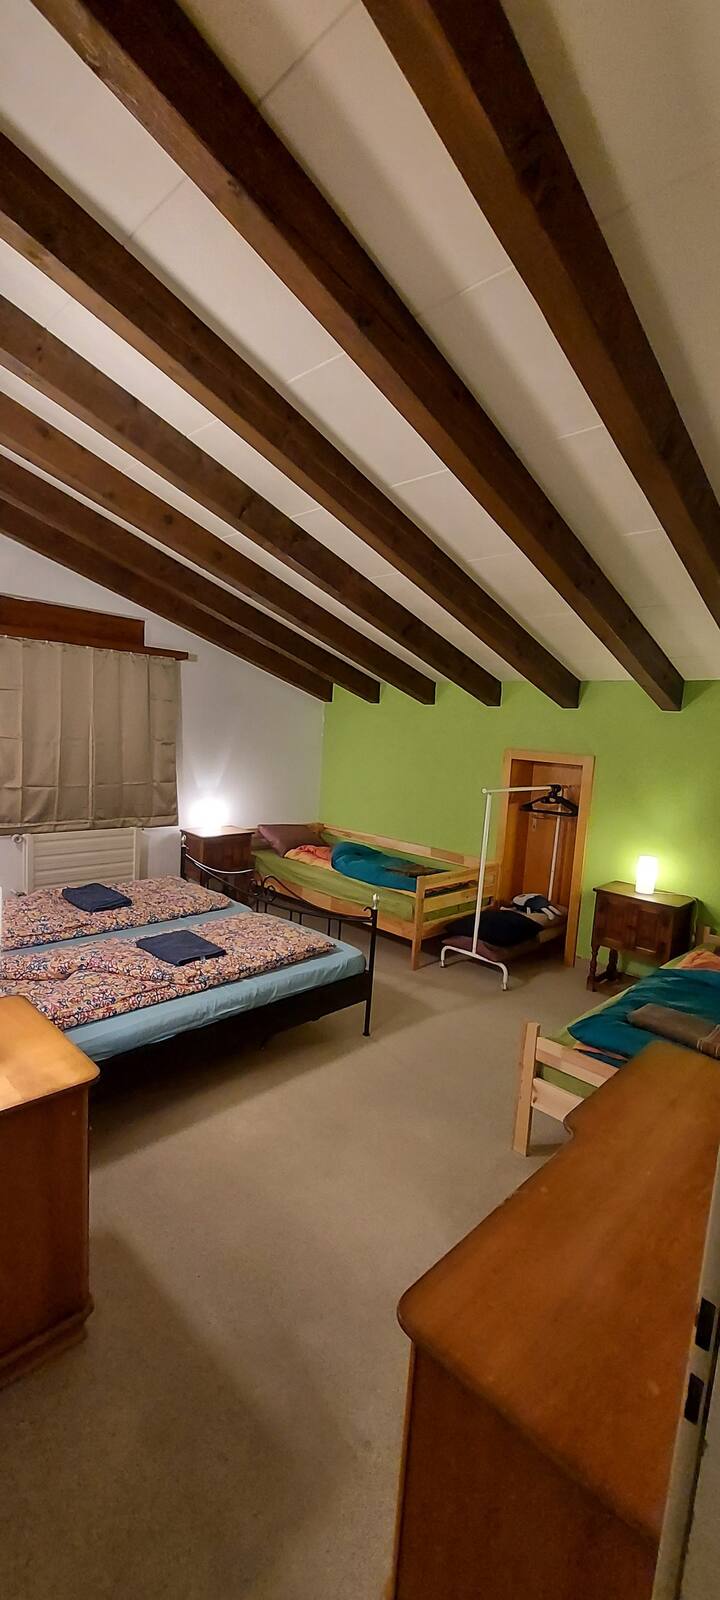 Master bedroom with beds for 4 persons